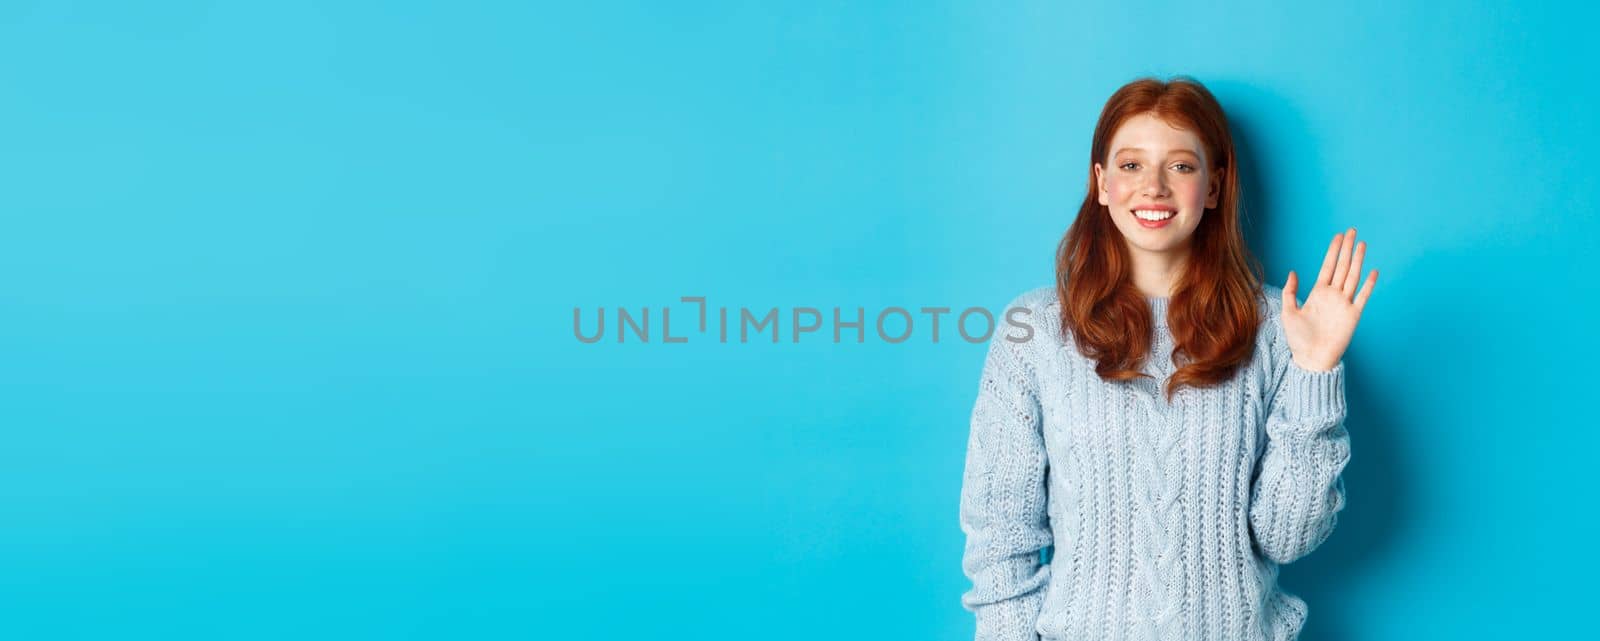 Friendly redhead teenage girl saying hi, waving hand in hello gesture and smiling, standing against blue background.